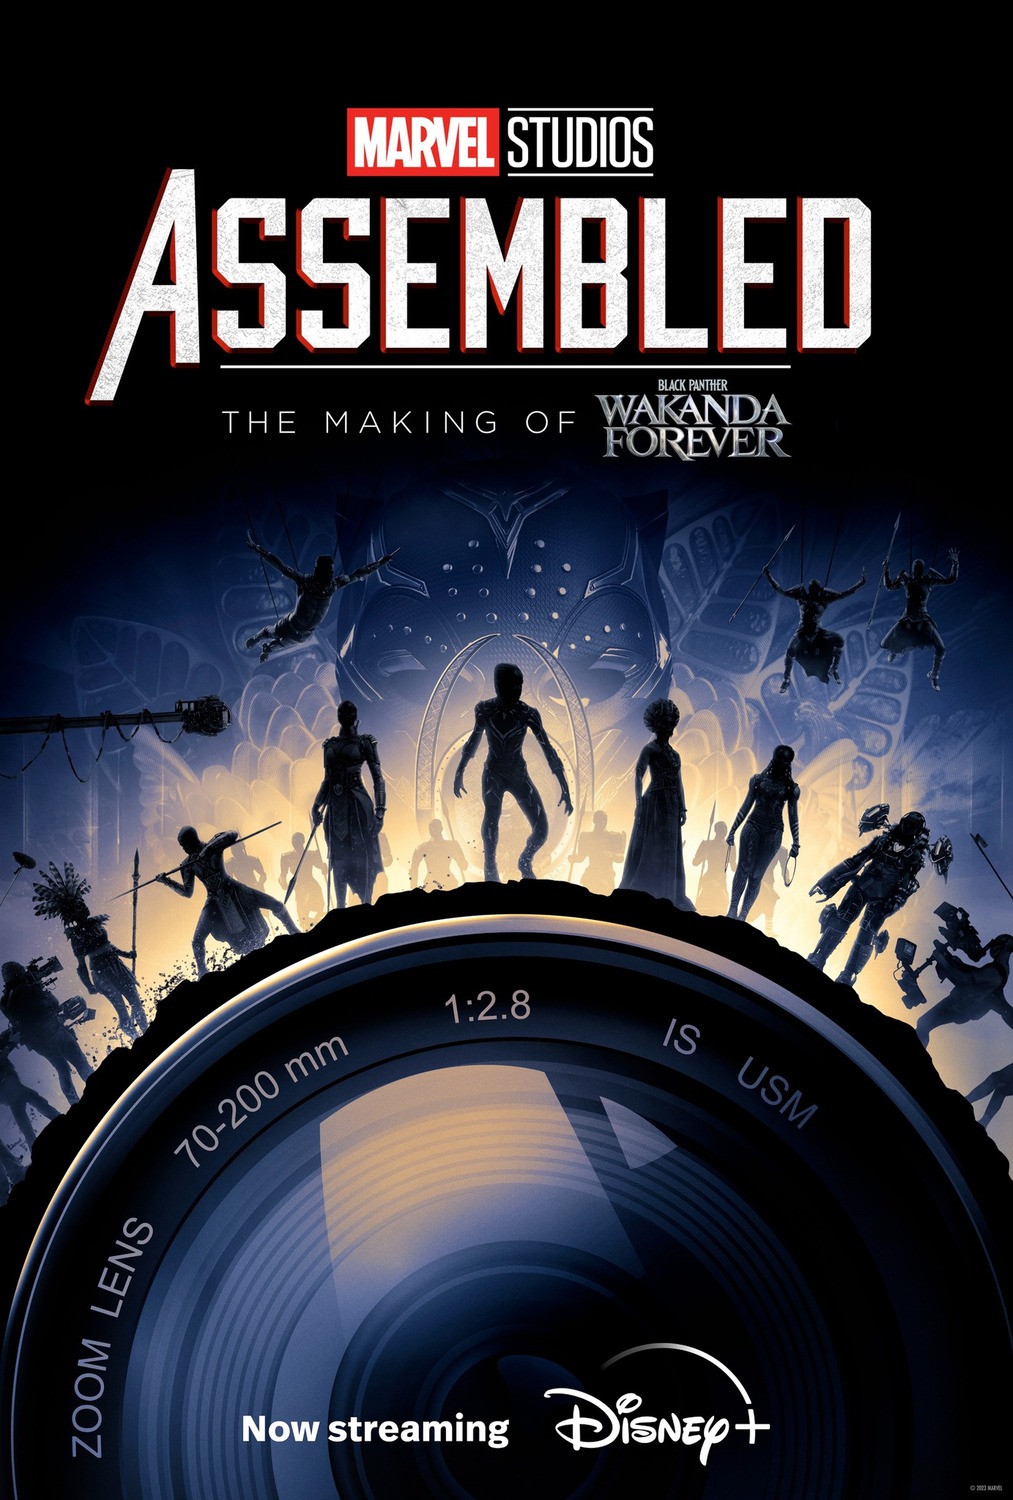 Extra Large TV Poster Image for Marvel Studios: Assembled (#14 of 21)